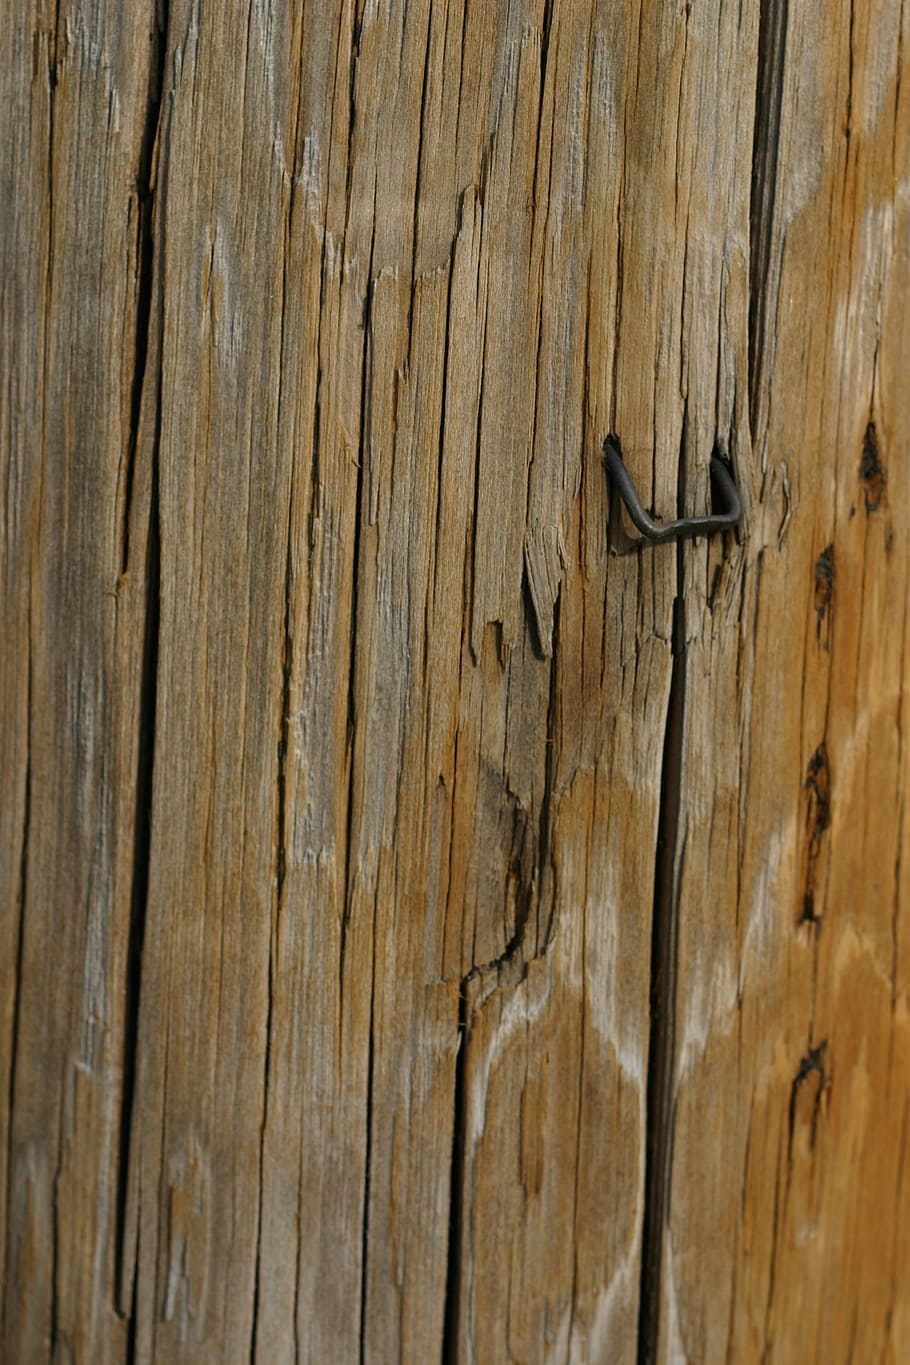 wood, texture, telephone pole, wood - material, textured, full frame, backgrounds, pattern, close-up, brown